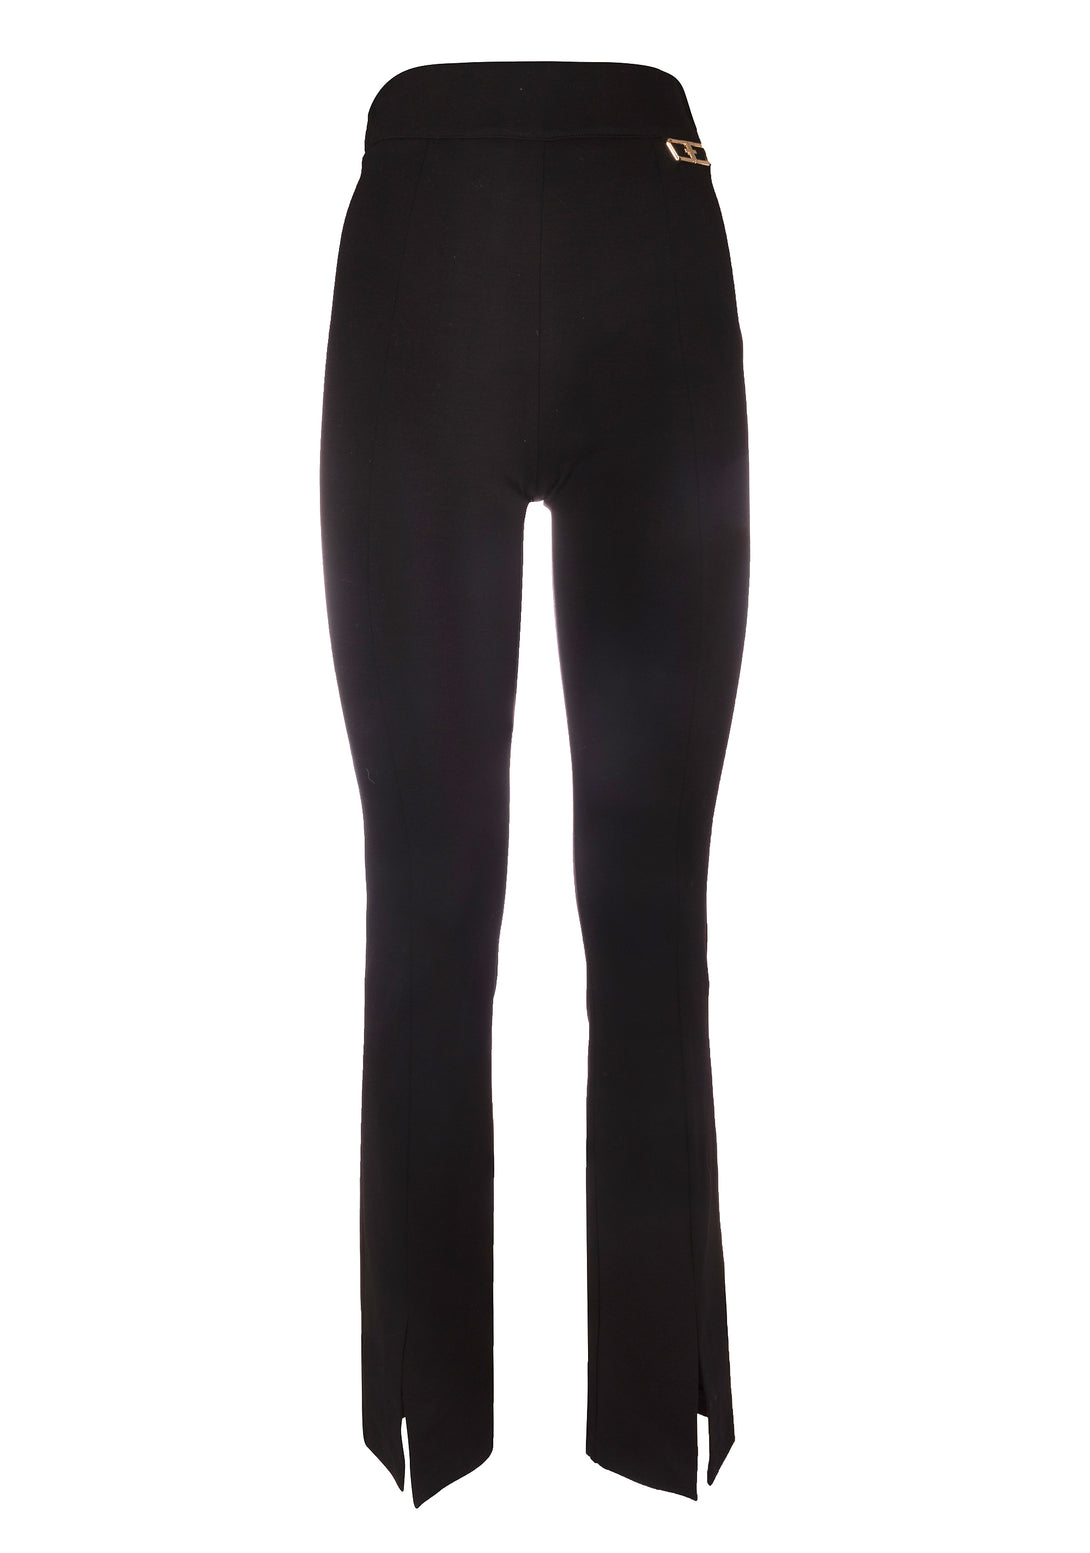 Leggings slim fit made in technical fabric